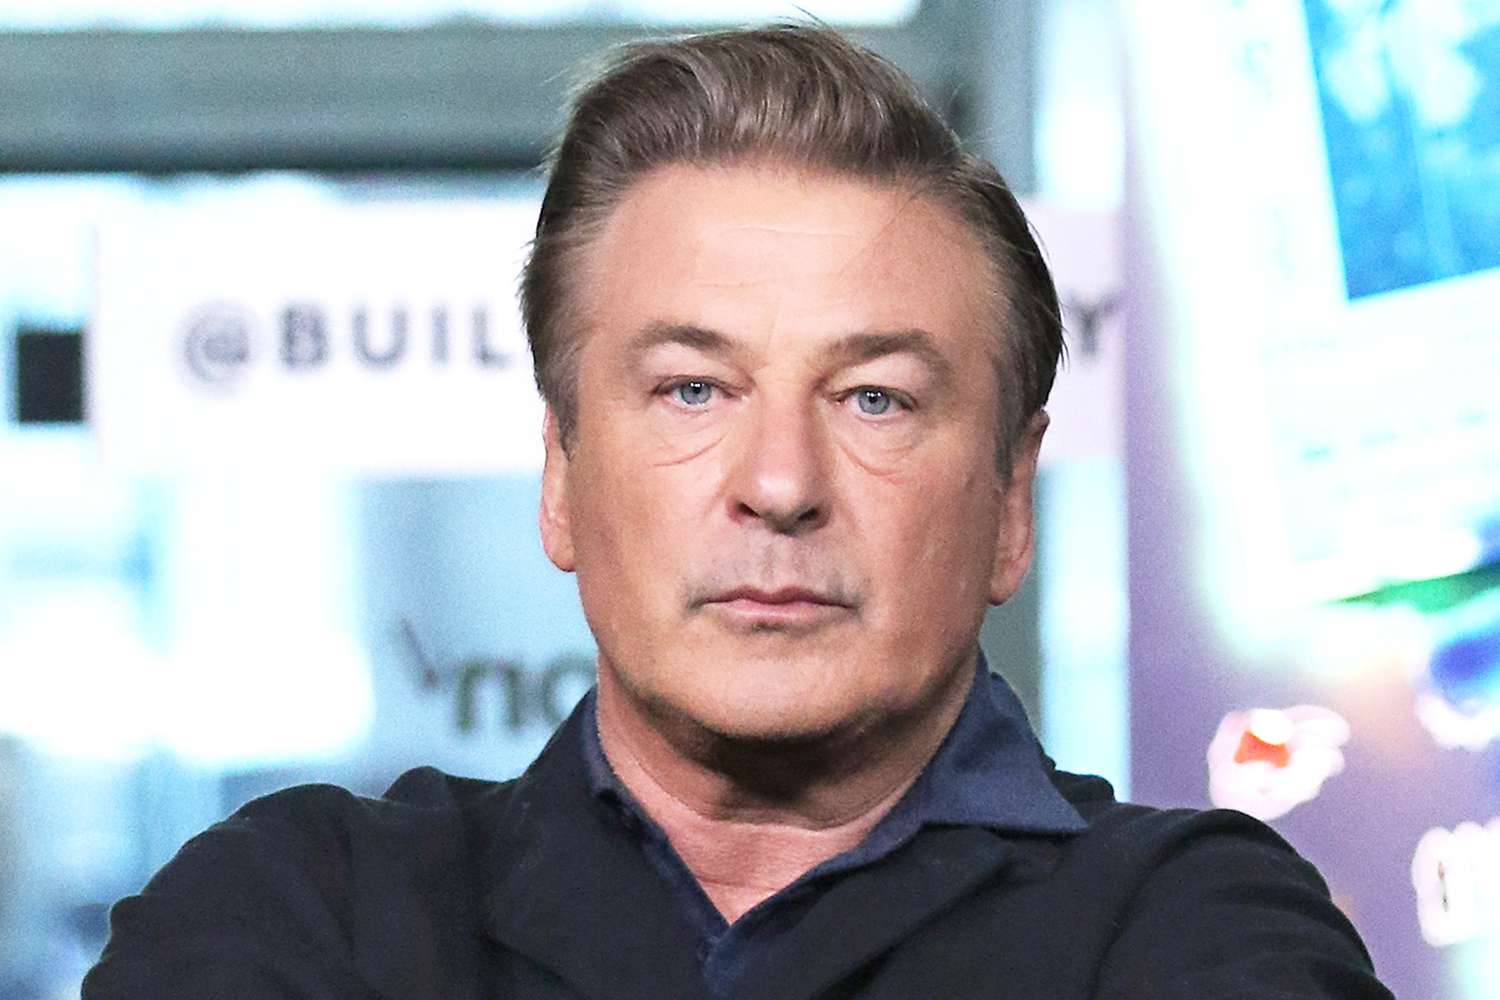 Judge in Alec Baldwin’s “Rust” Case Upholds His Involuntary Manslaughter Charge, Trial Will Proceed